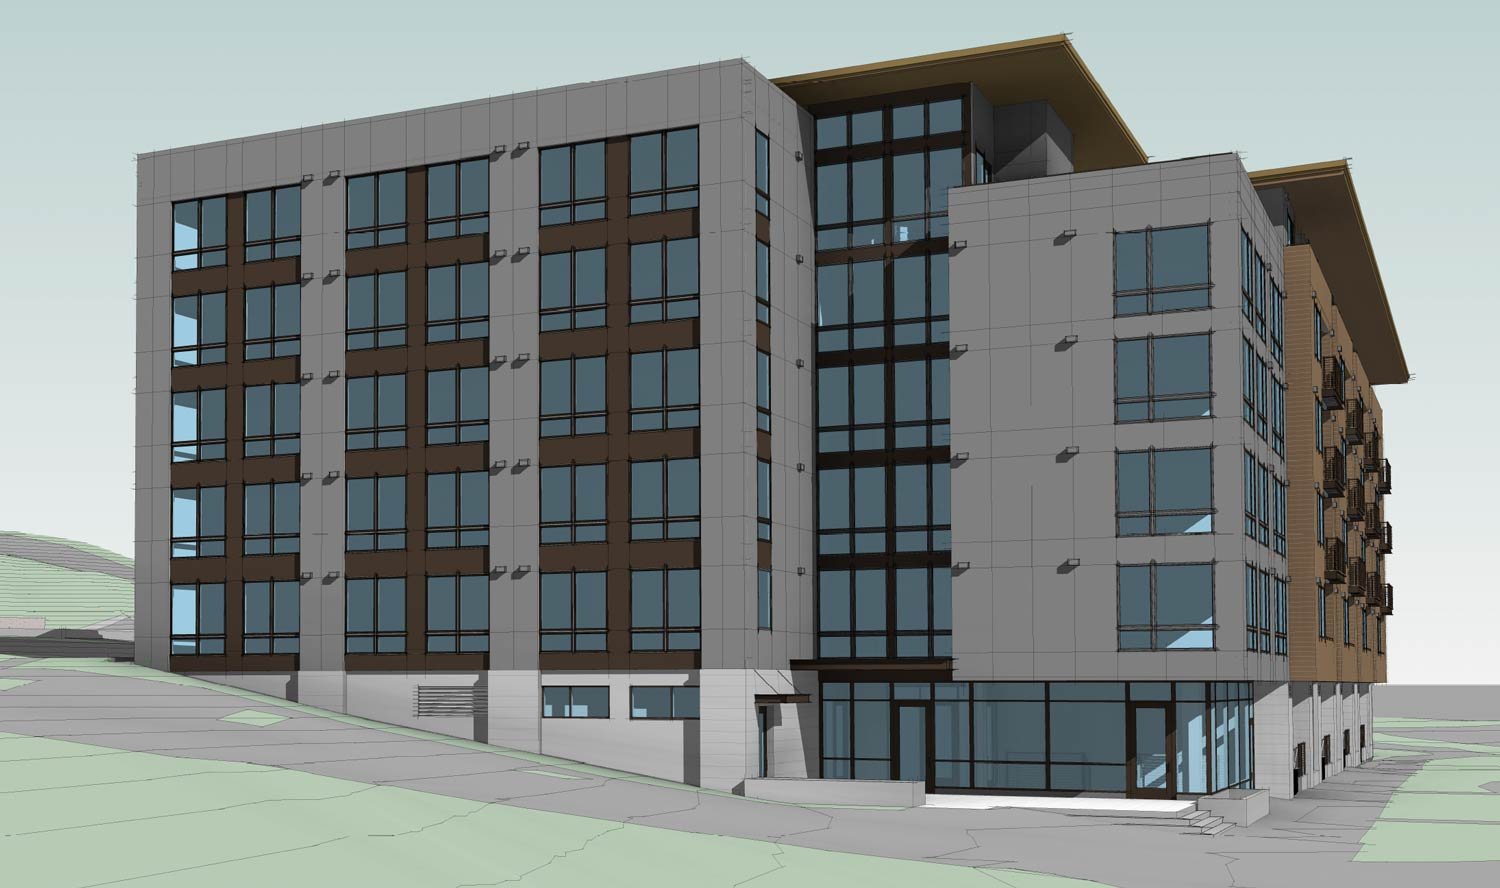 Rendering of Planned Building - North Facing